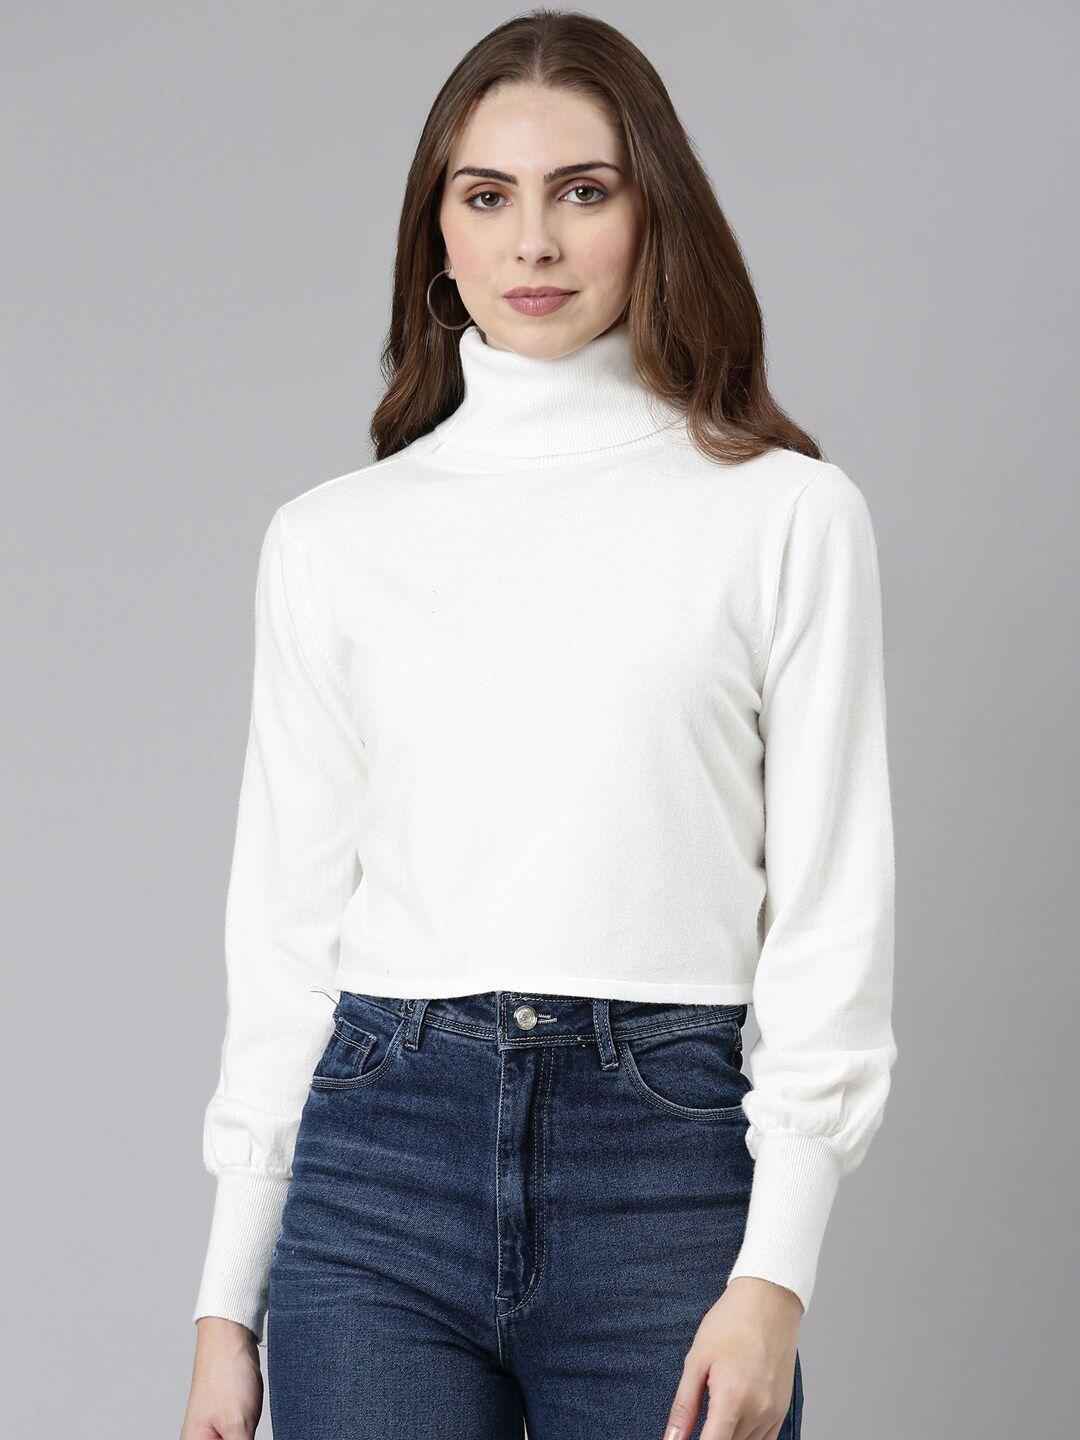 showoff high neck cuffed sleeves crop top